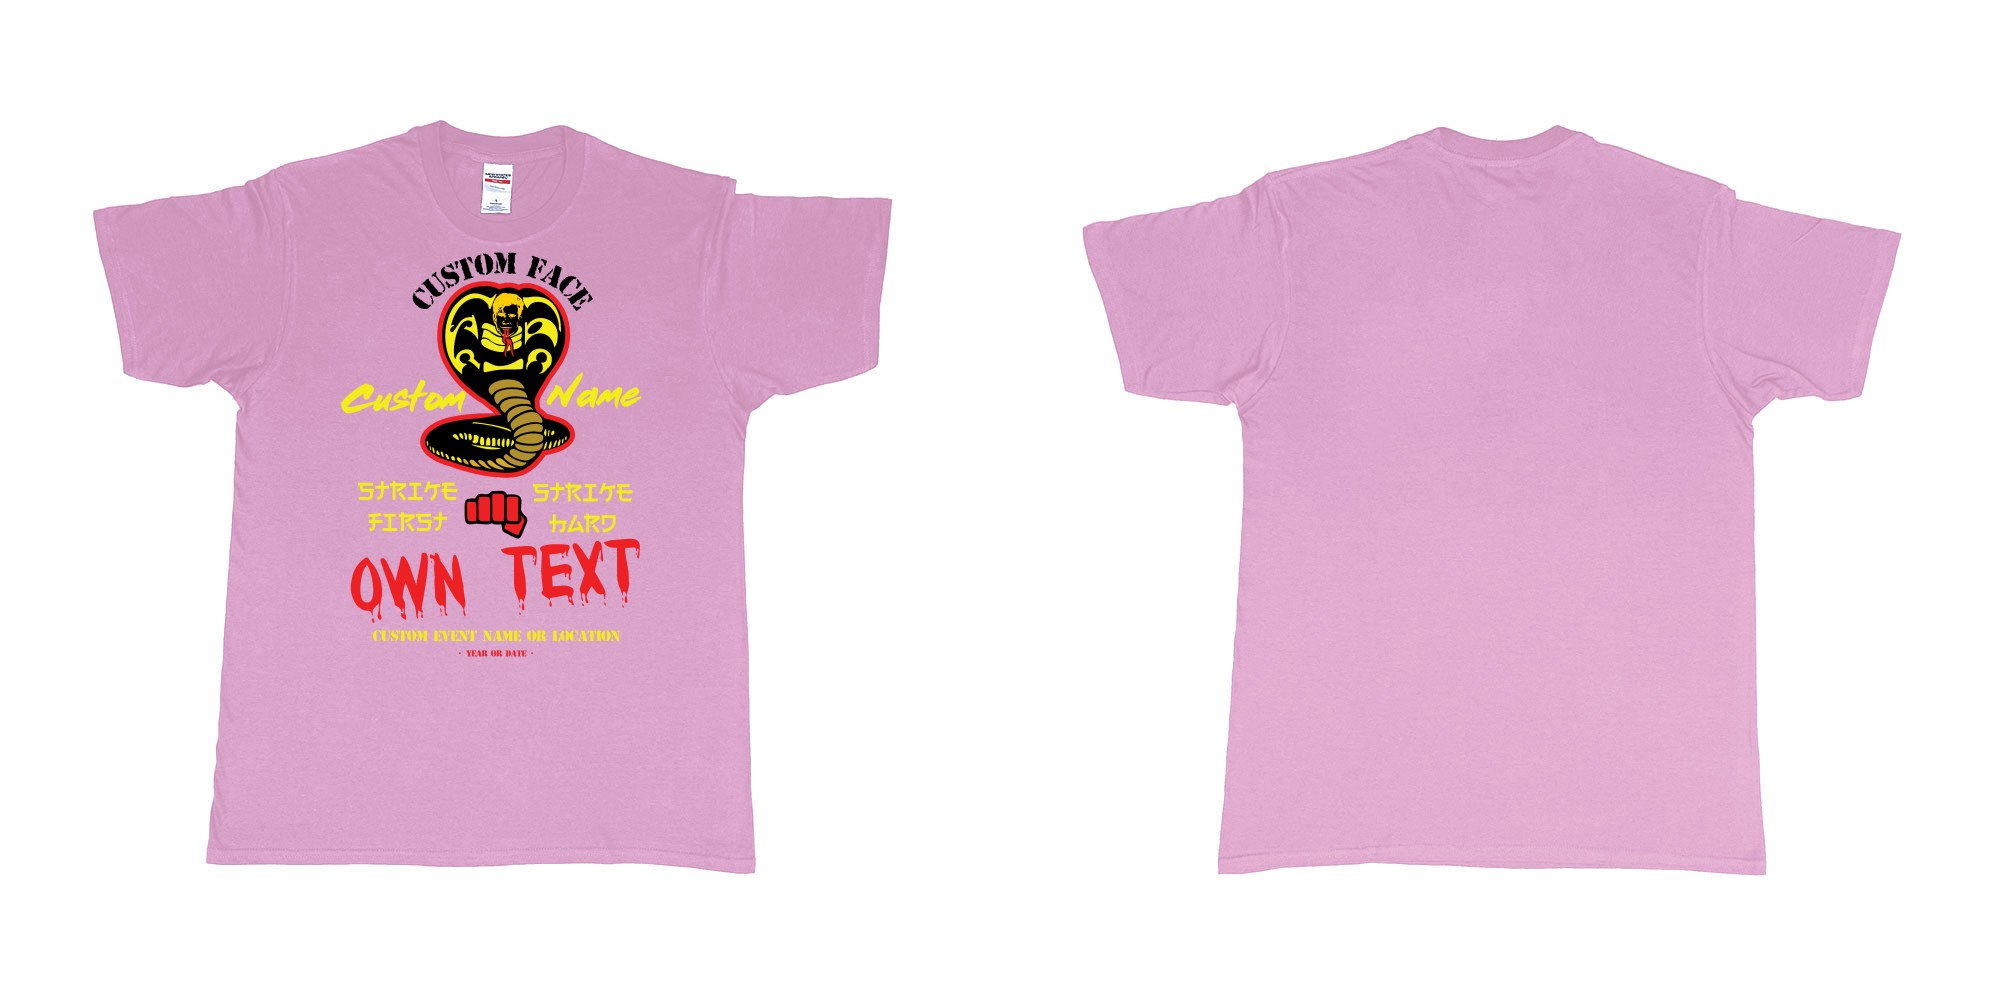 Custom tshirt design cobra kai strike first strike hard no mercy custom text in fabric color light-pink choice your own text made in Bali by The Pirate Way